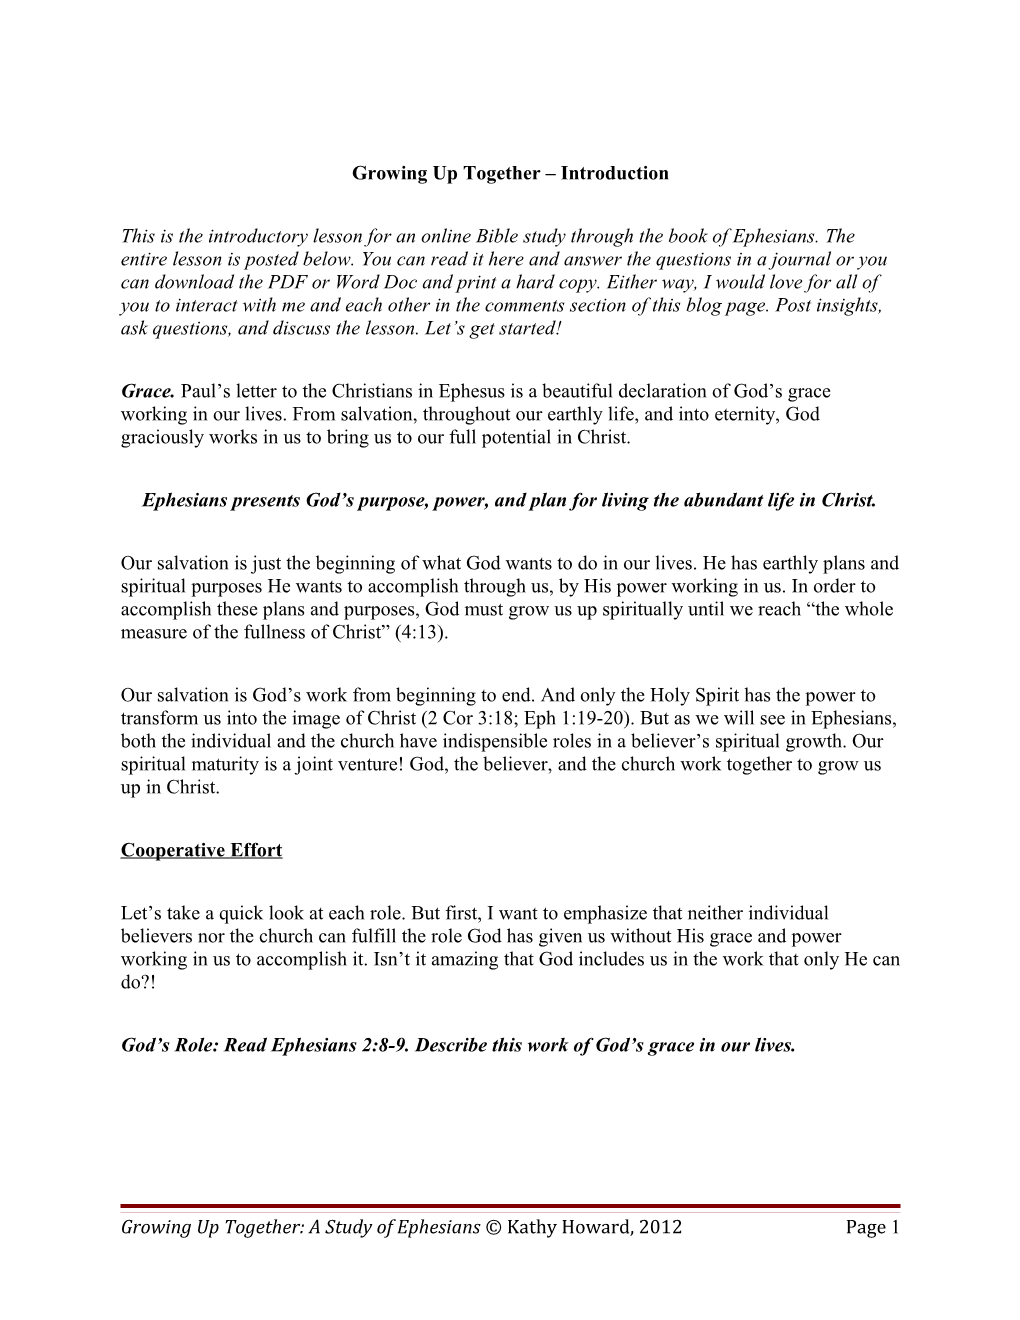 Growing up Together Introduction